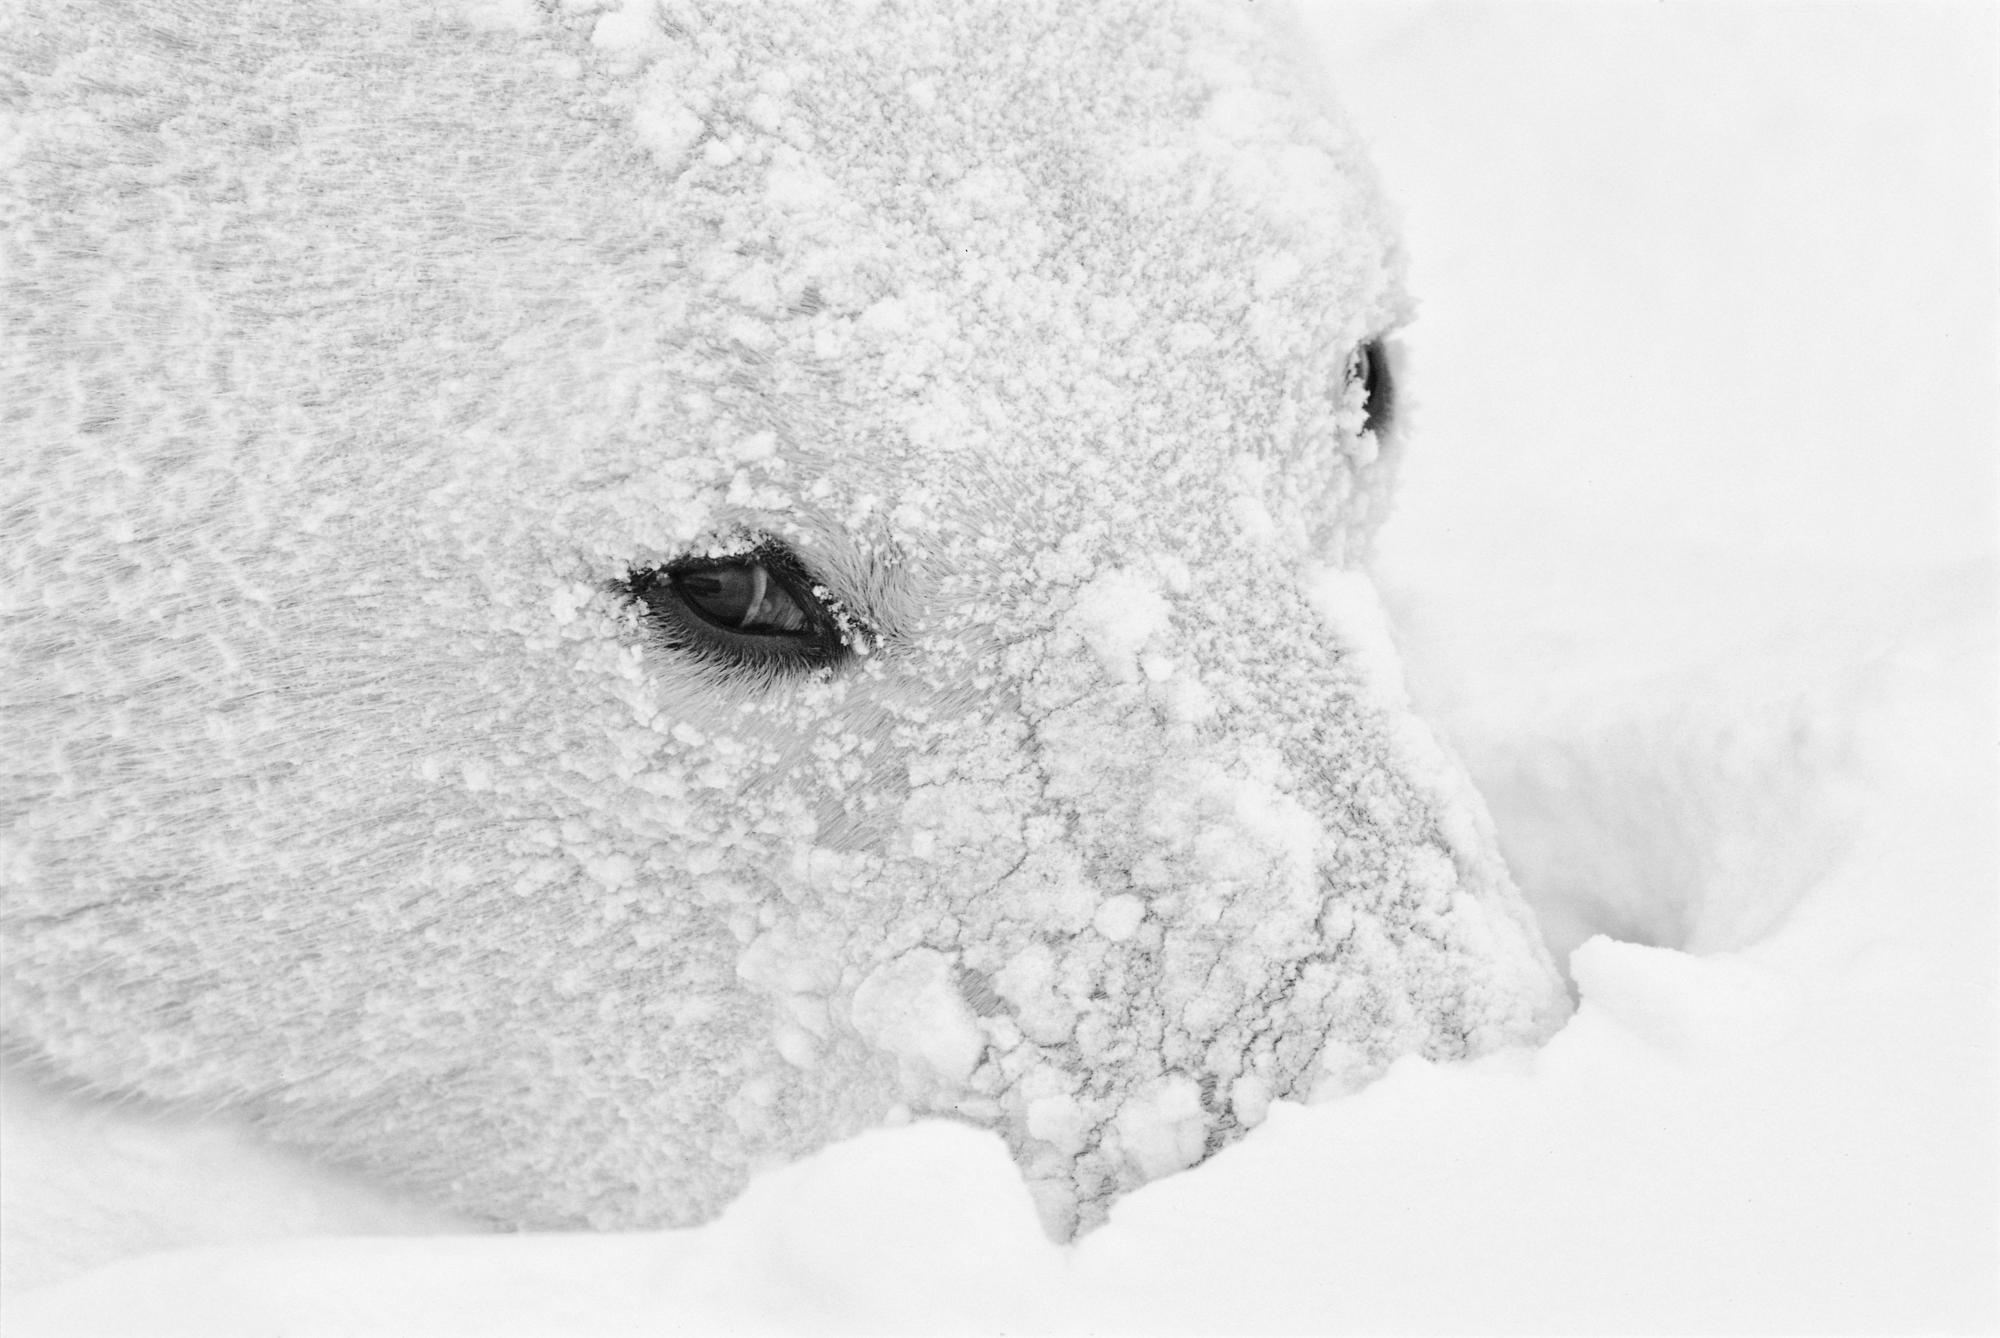 Paul Nicklen Black and White Photograph - Icy Stare